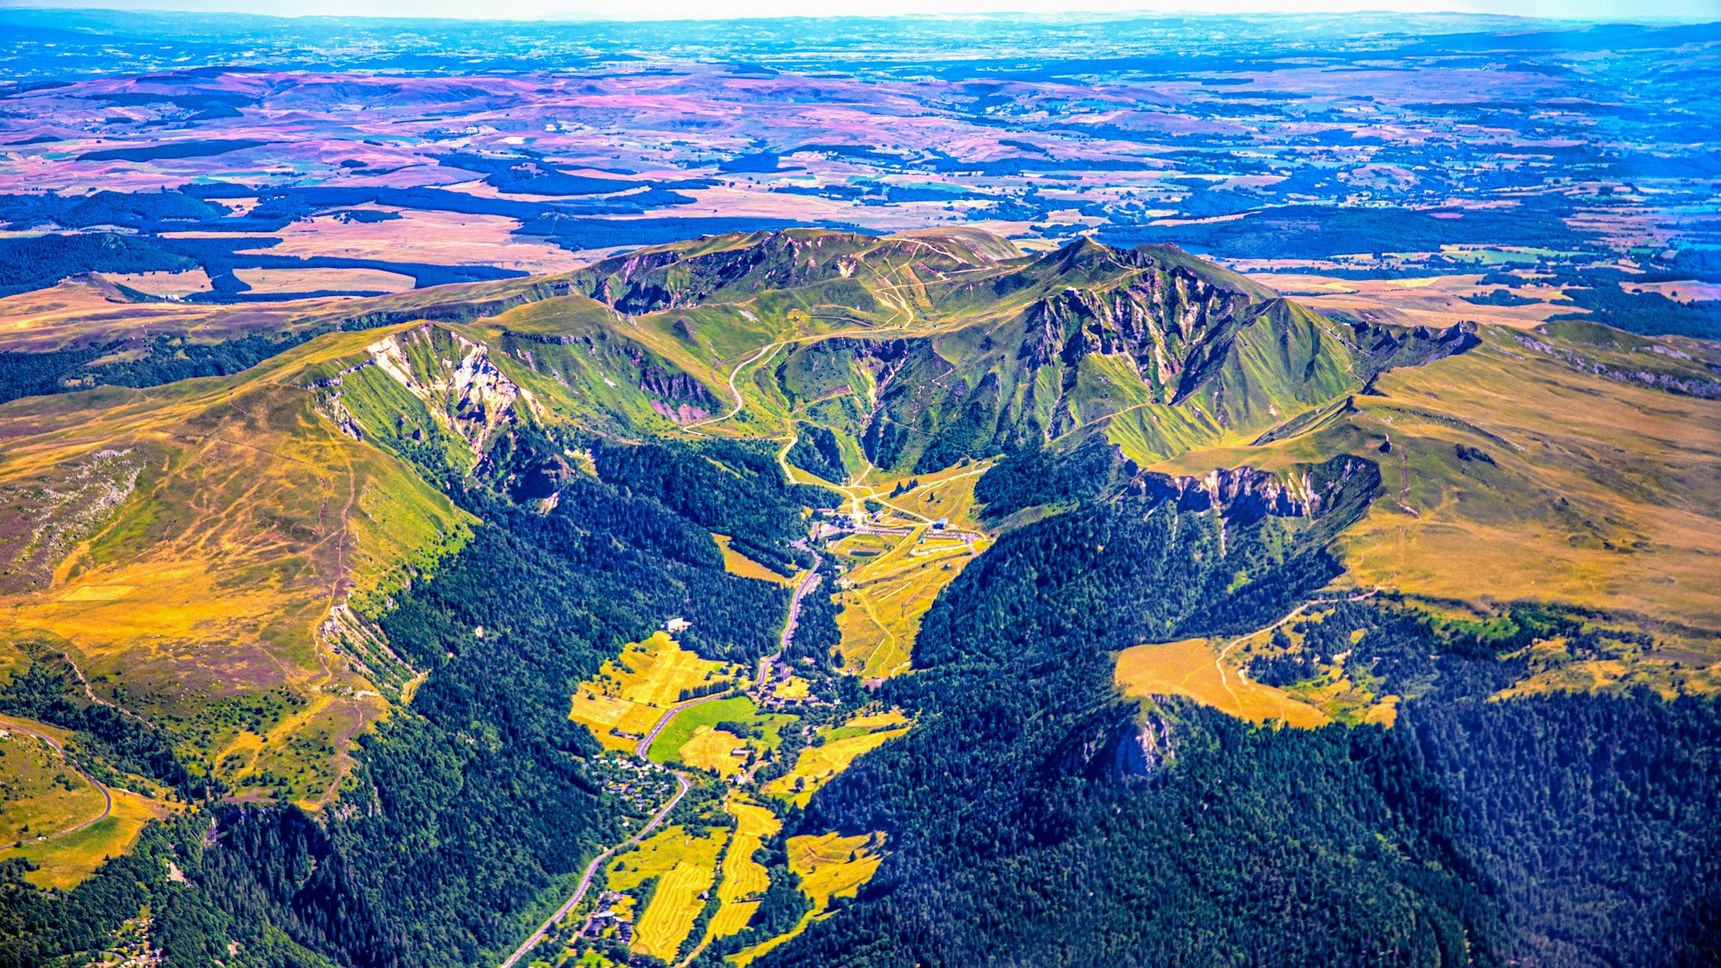 Aerial view of the Massif du Sancy, view of the summits of Sancy